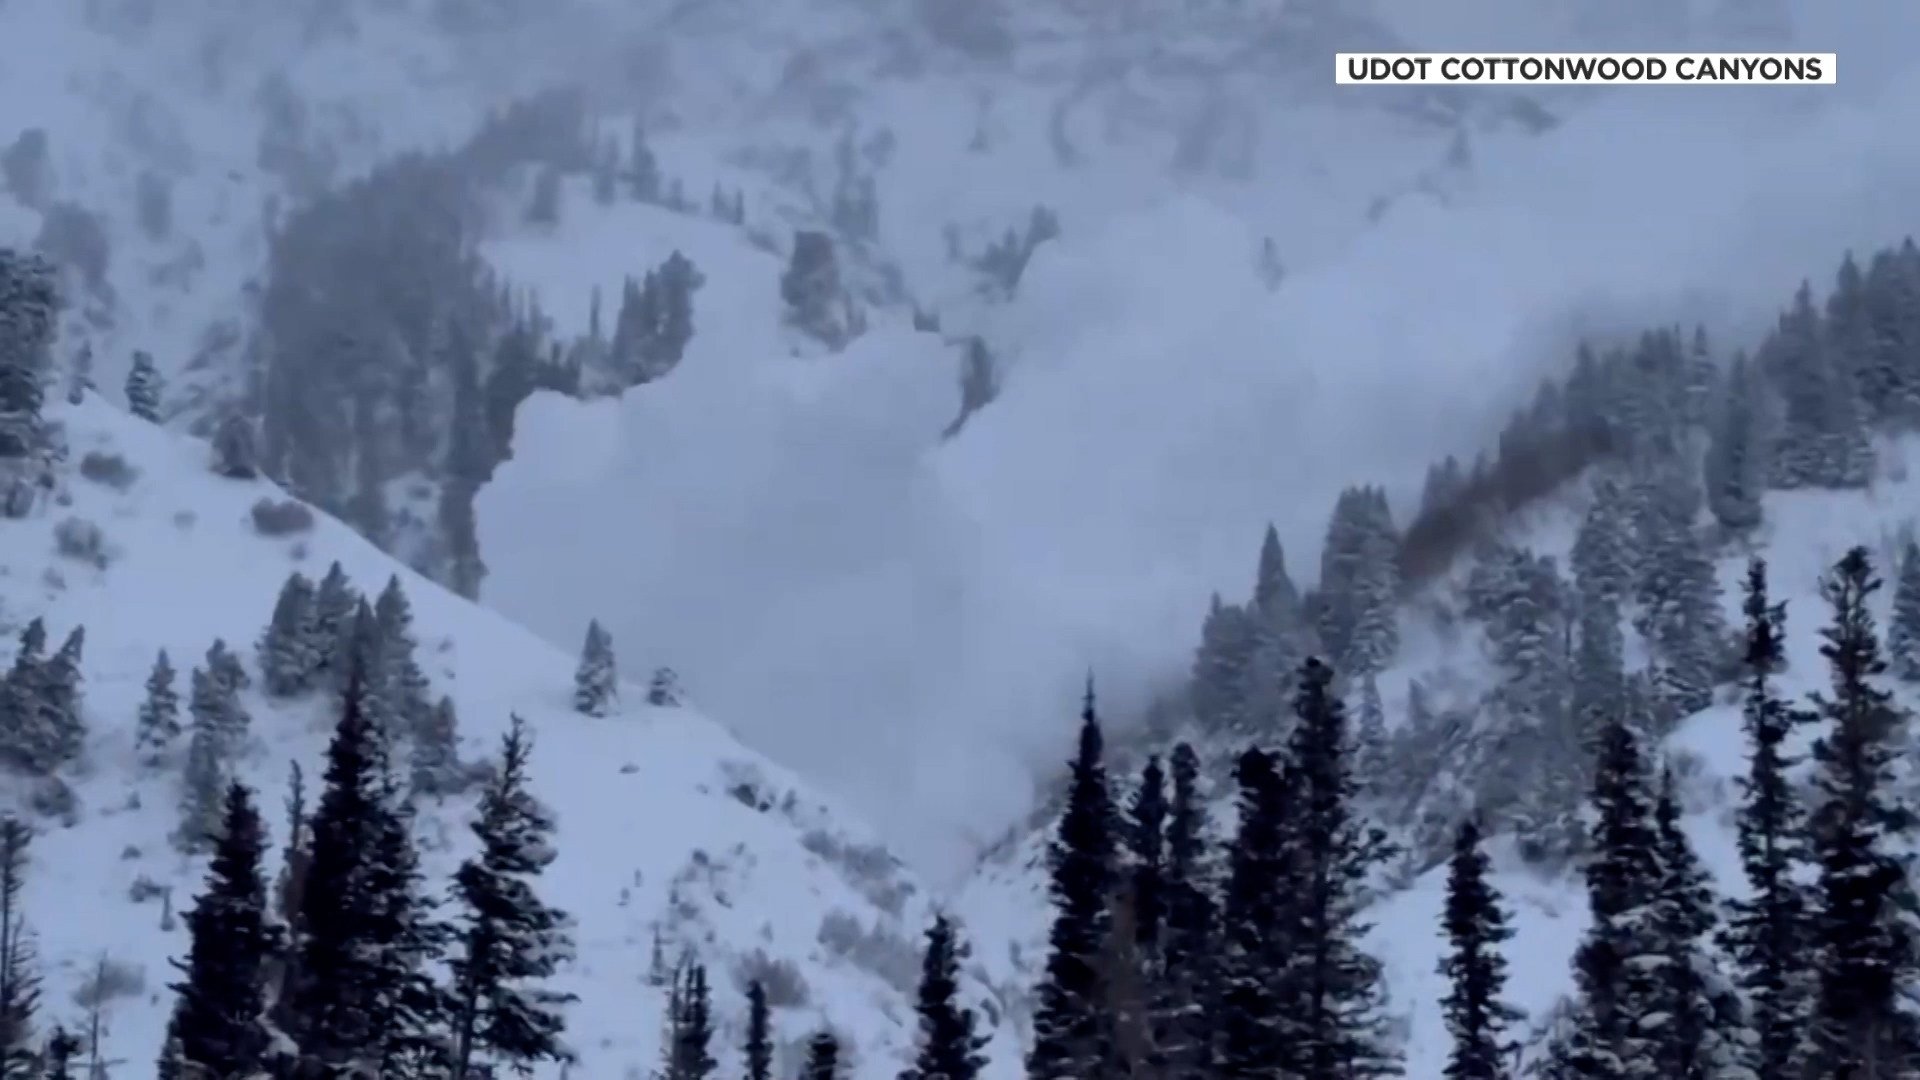 An avalanche triggered by UDOT in Little Cottonwood Canyon....